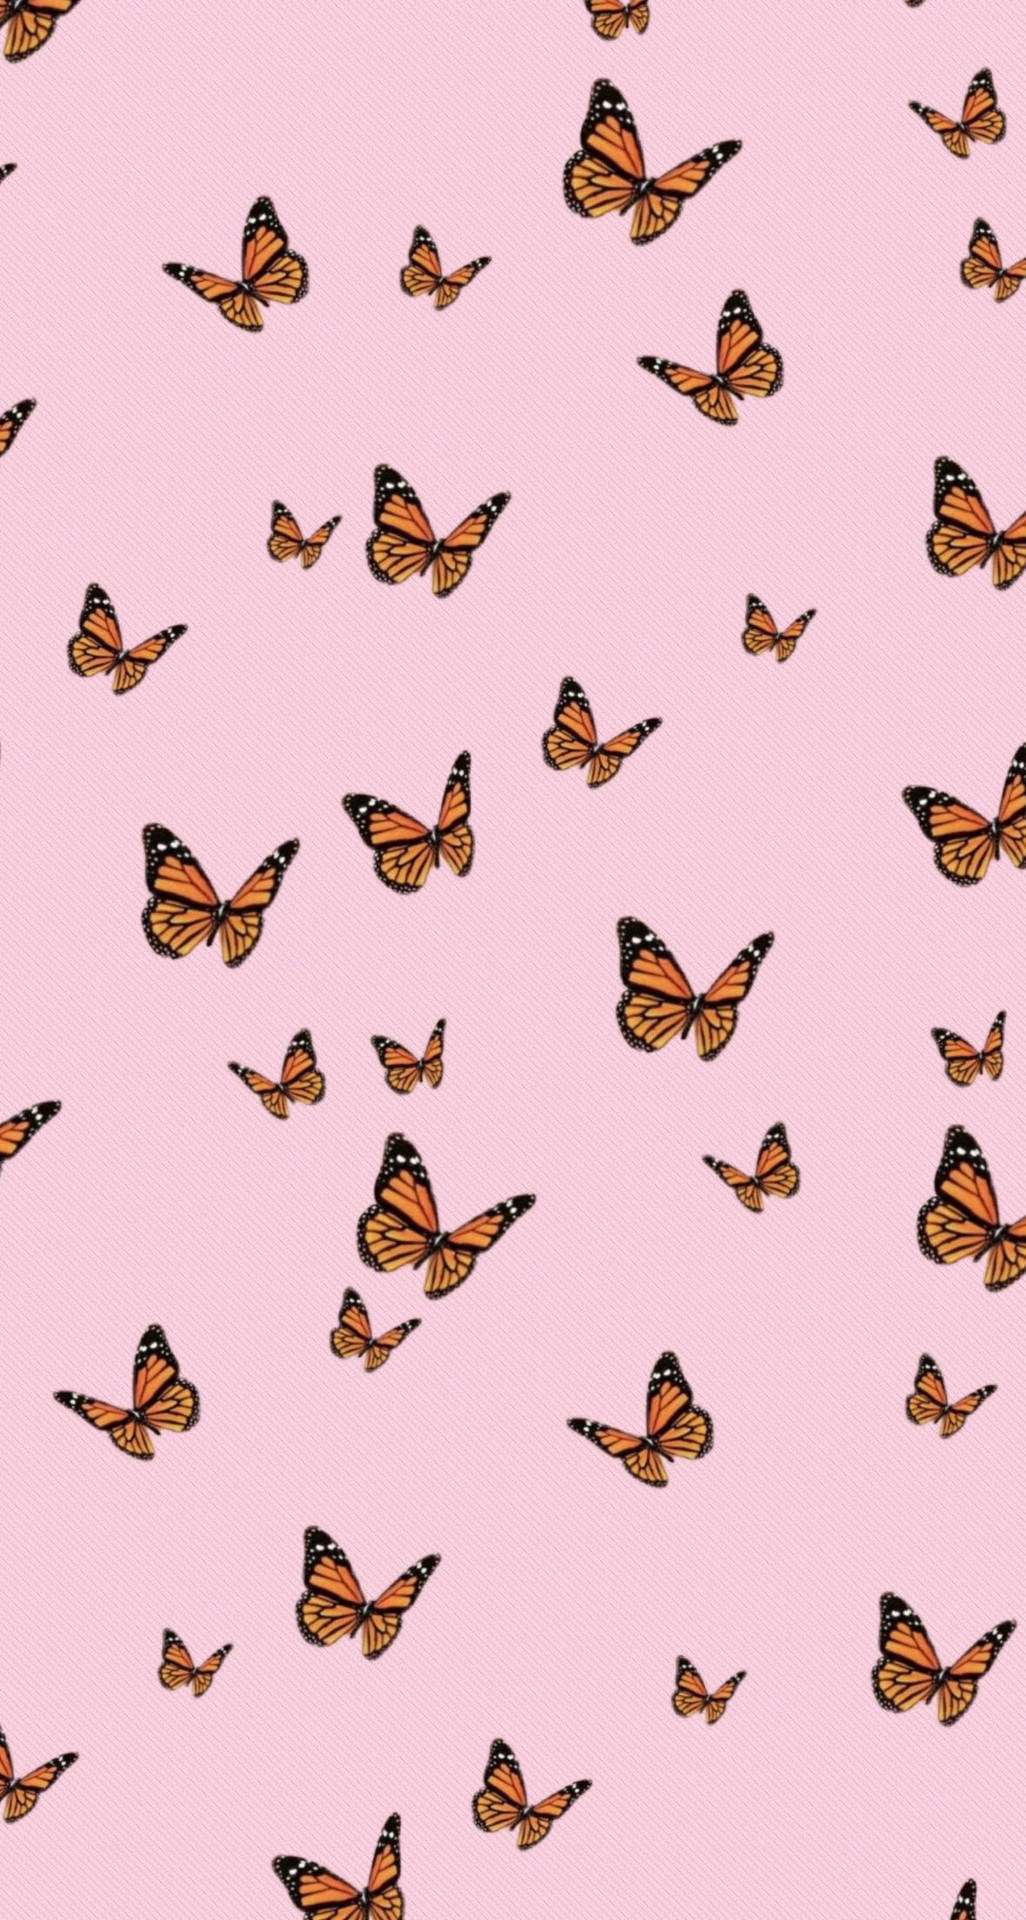 Download Cute Pink Pastel Butterfly Patterns Wallpaper | Wallpapers.com